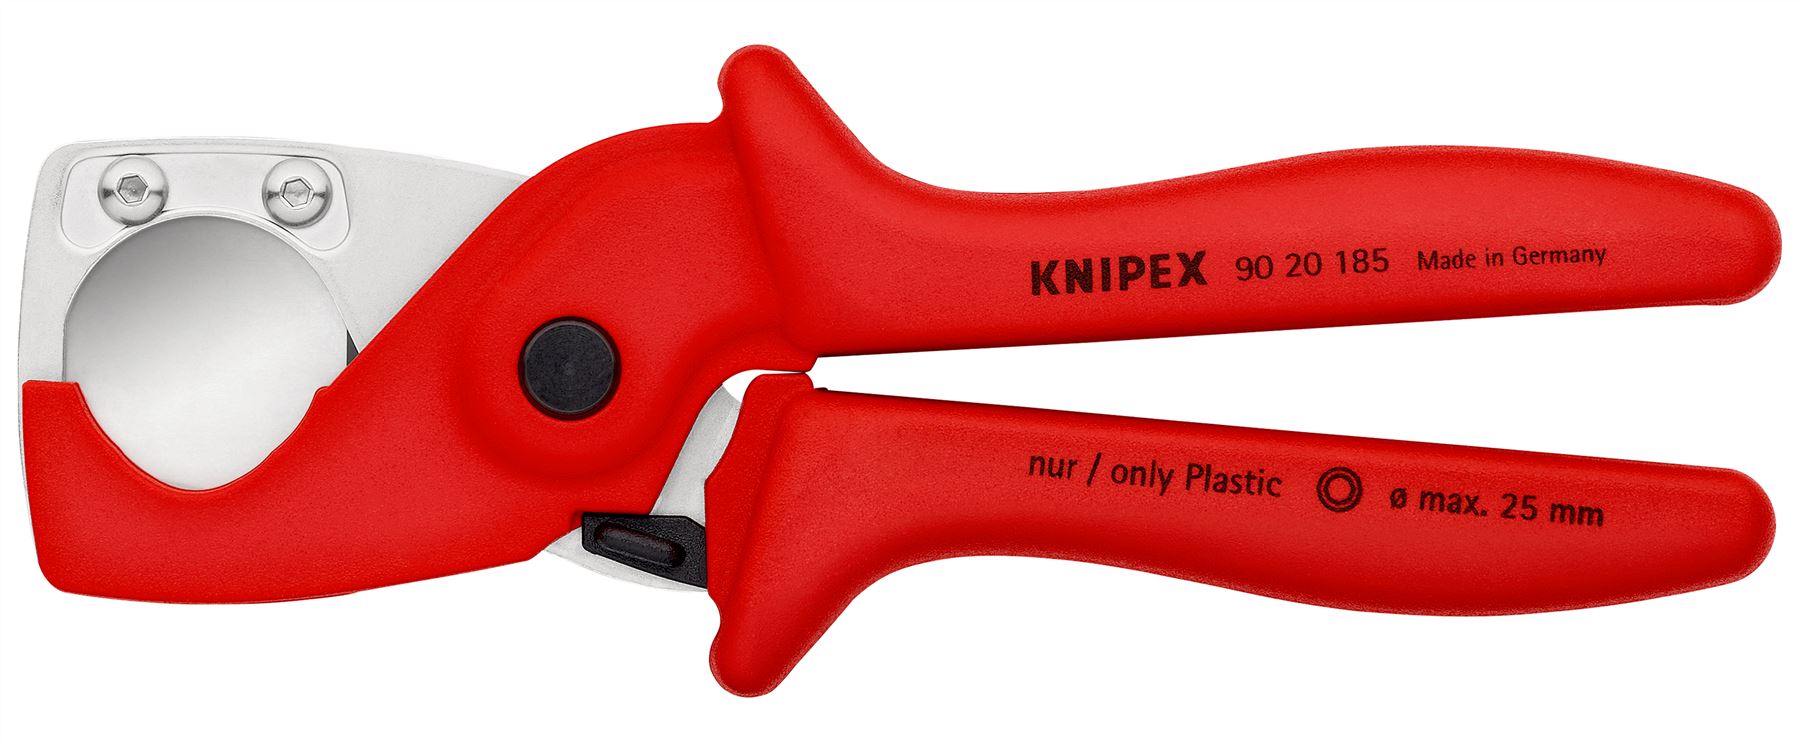 KNIPEX PlastiCut Cutter for Flexible Hoses and Plastic Conduit Pipe 185mm 25mm Capacity 90 20 185 SB